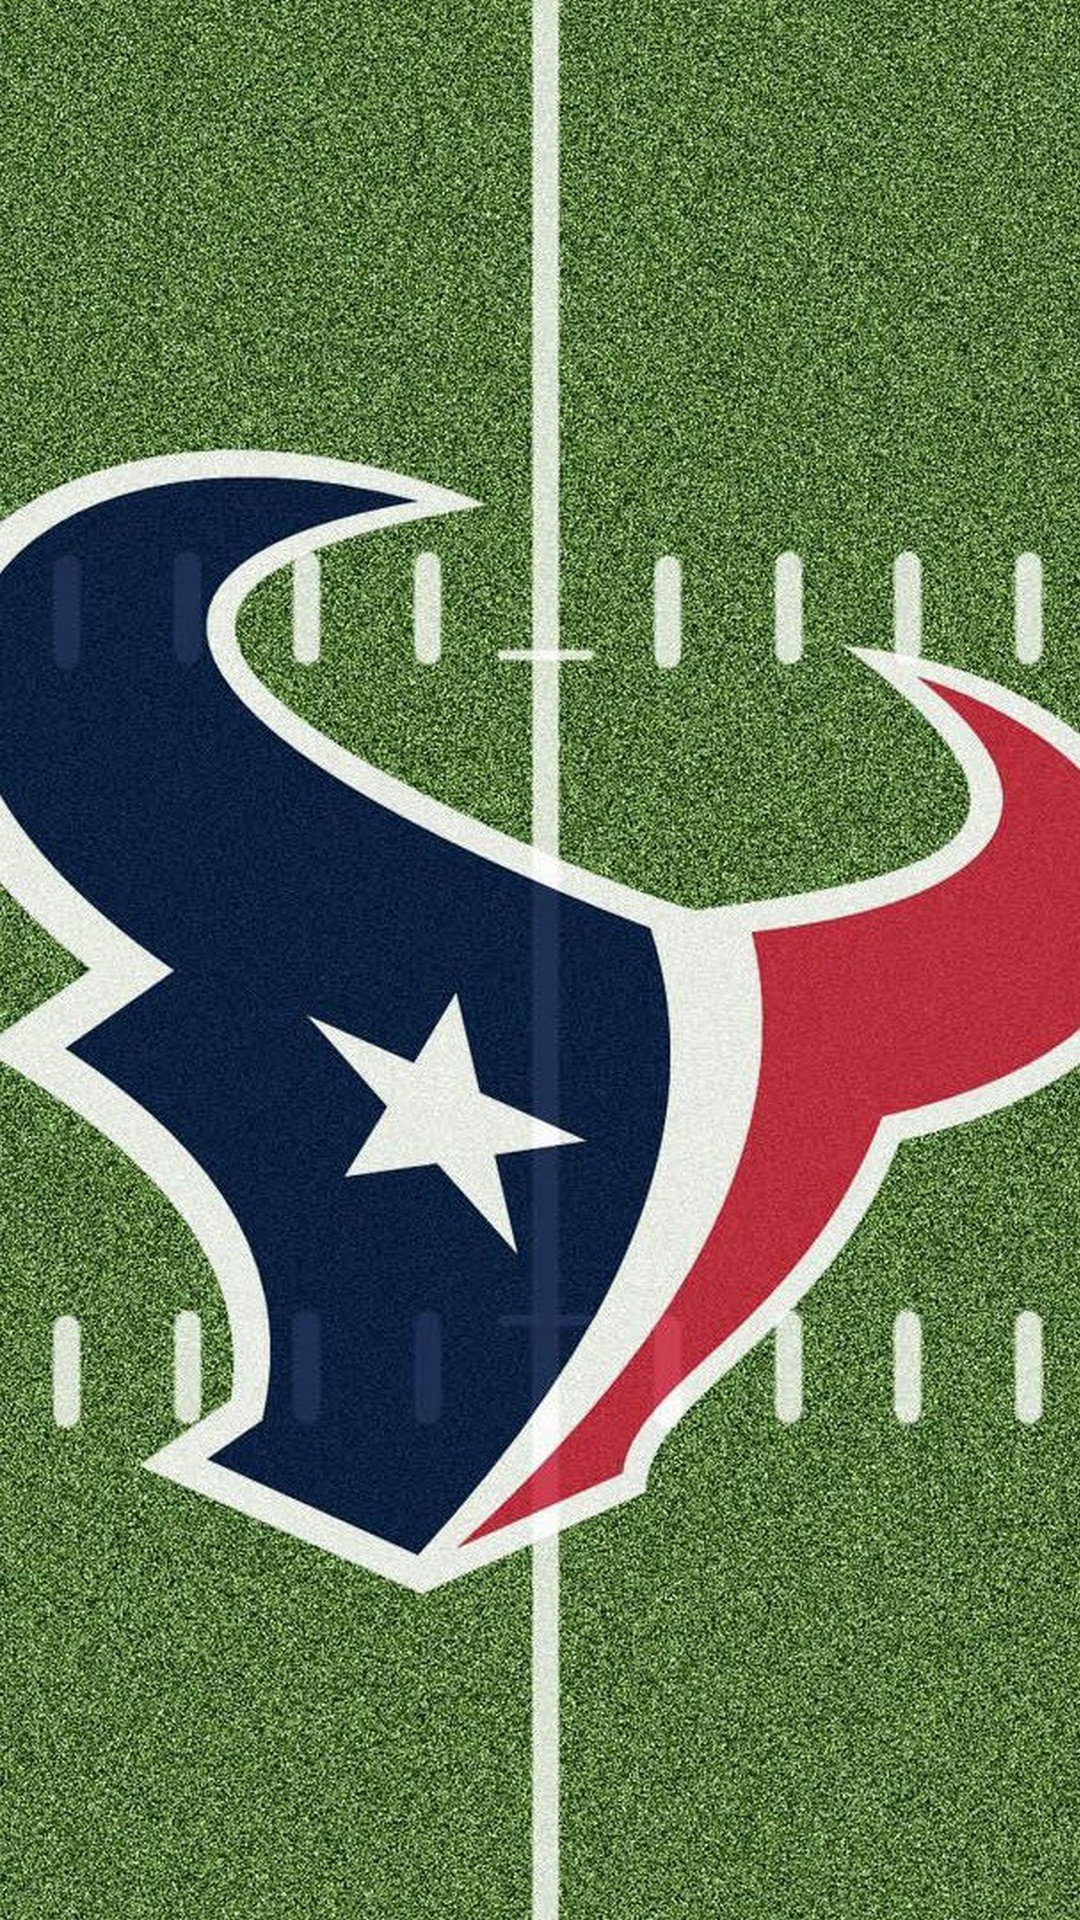 Houston Texans iPhone XR Wallpaper With high-resolution 1080X1920 pixel. Download and set as wallpaper for Apple iPhone X, XS Max, XR, 8, 7, 6, SE, iPad, Android